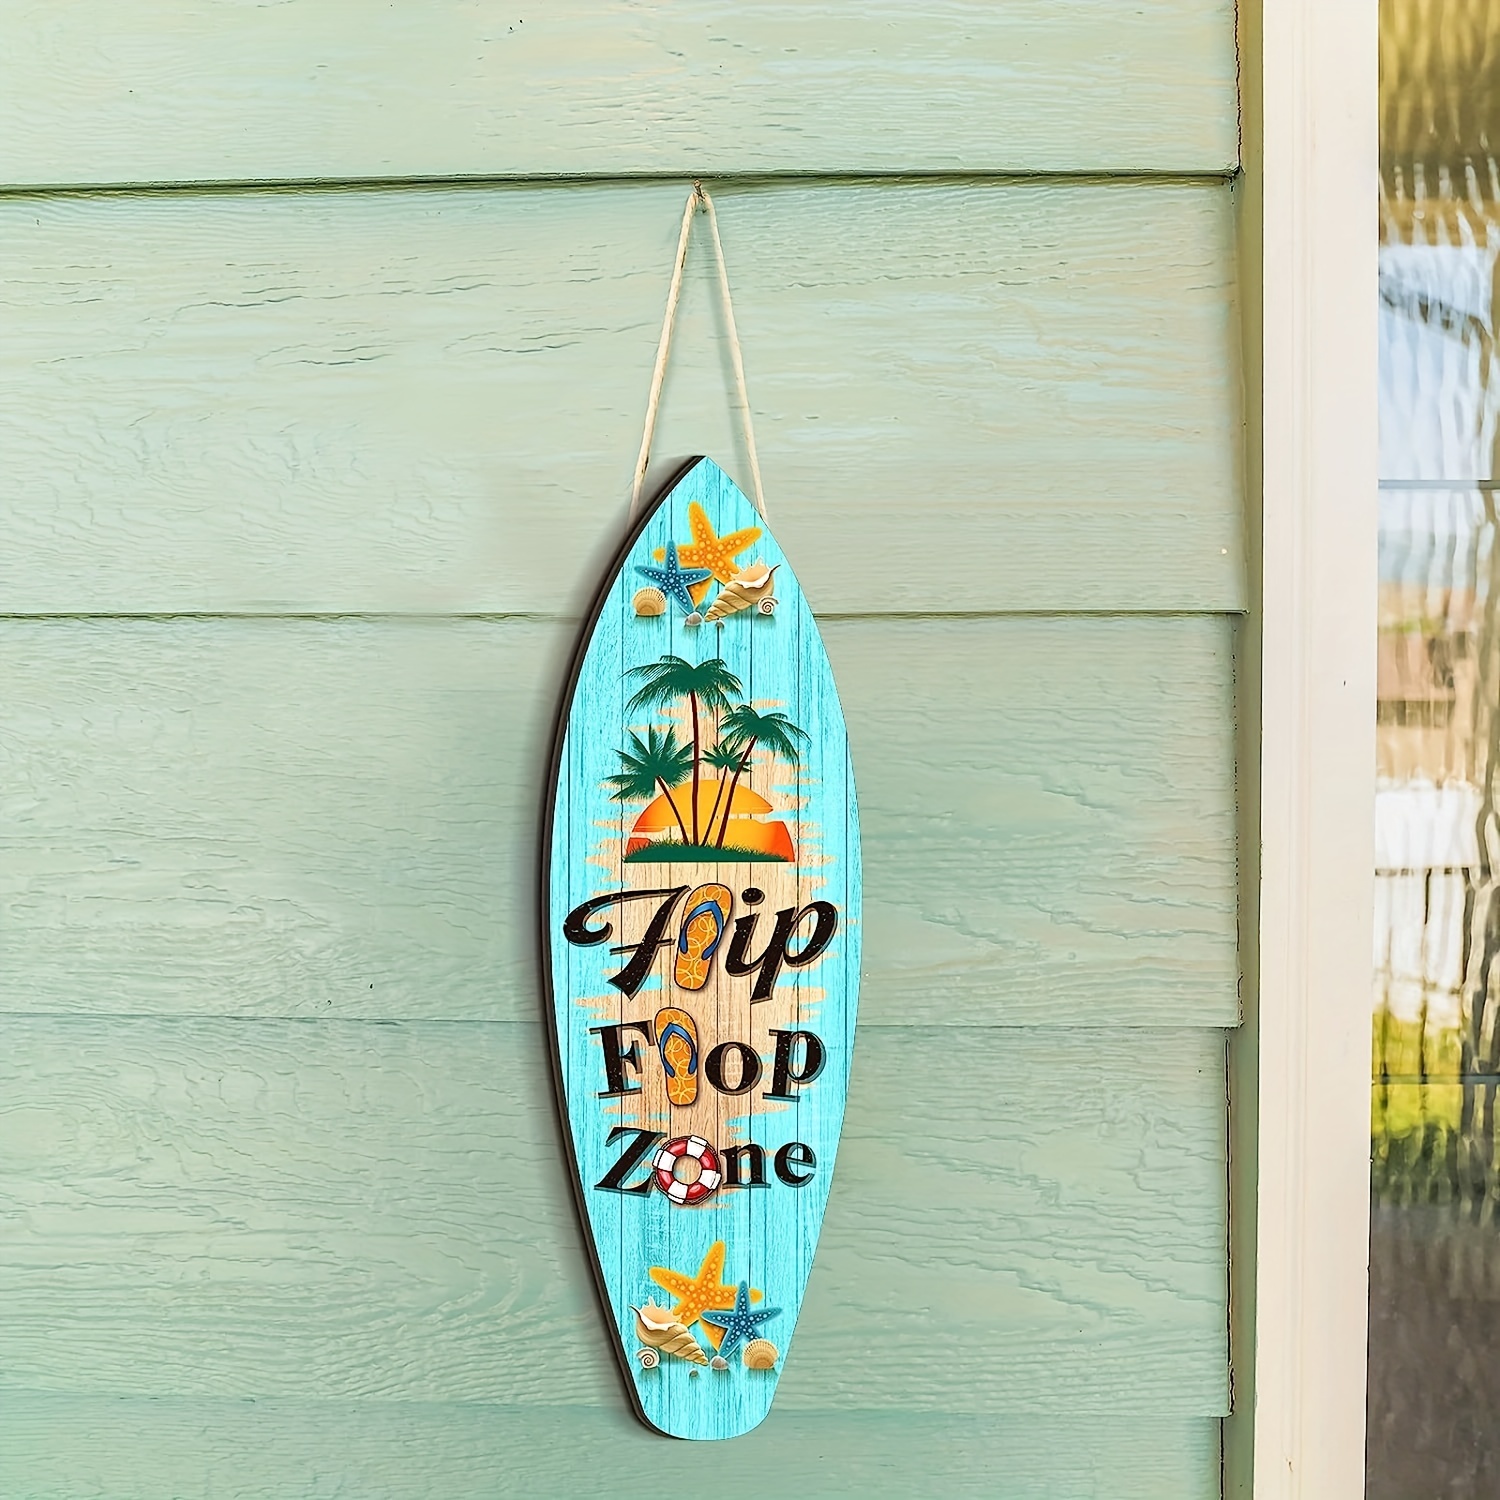 16 Surfboard-themed Home Decoration Ideas - Surfd